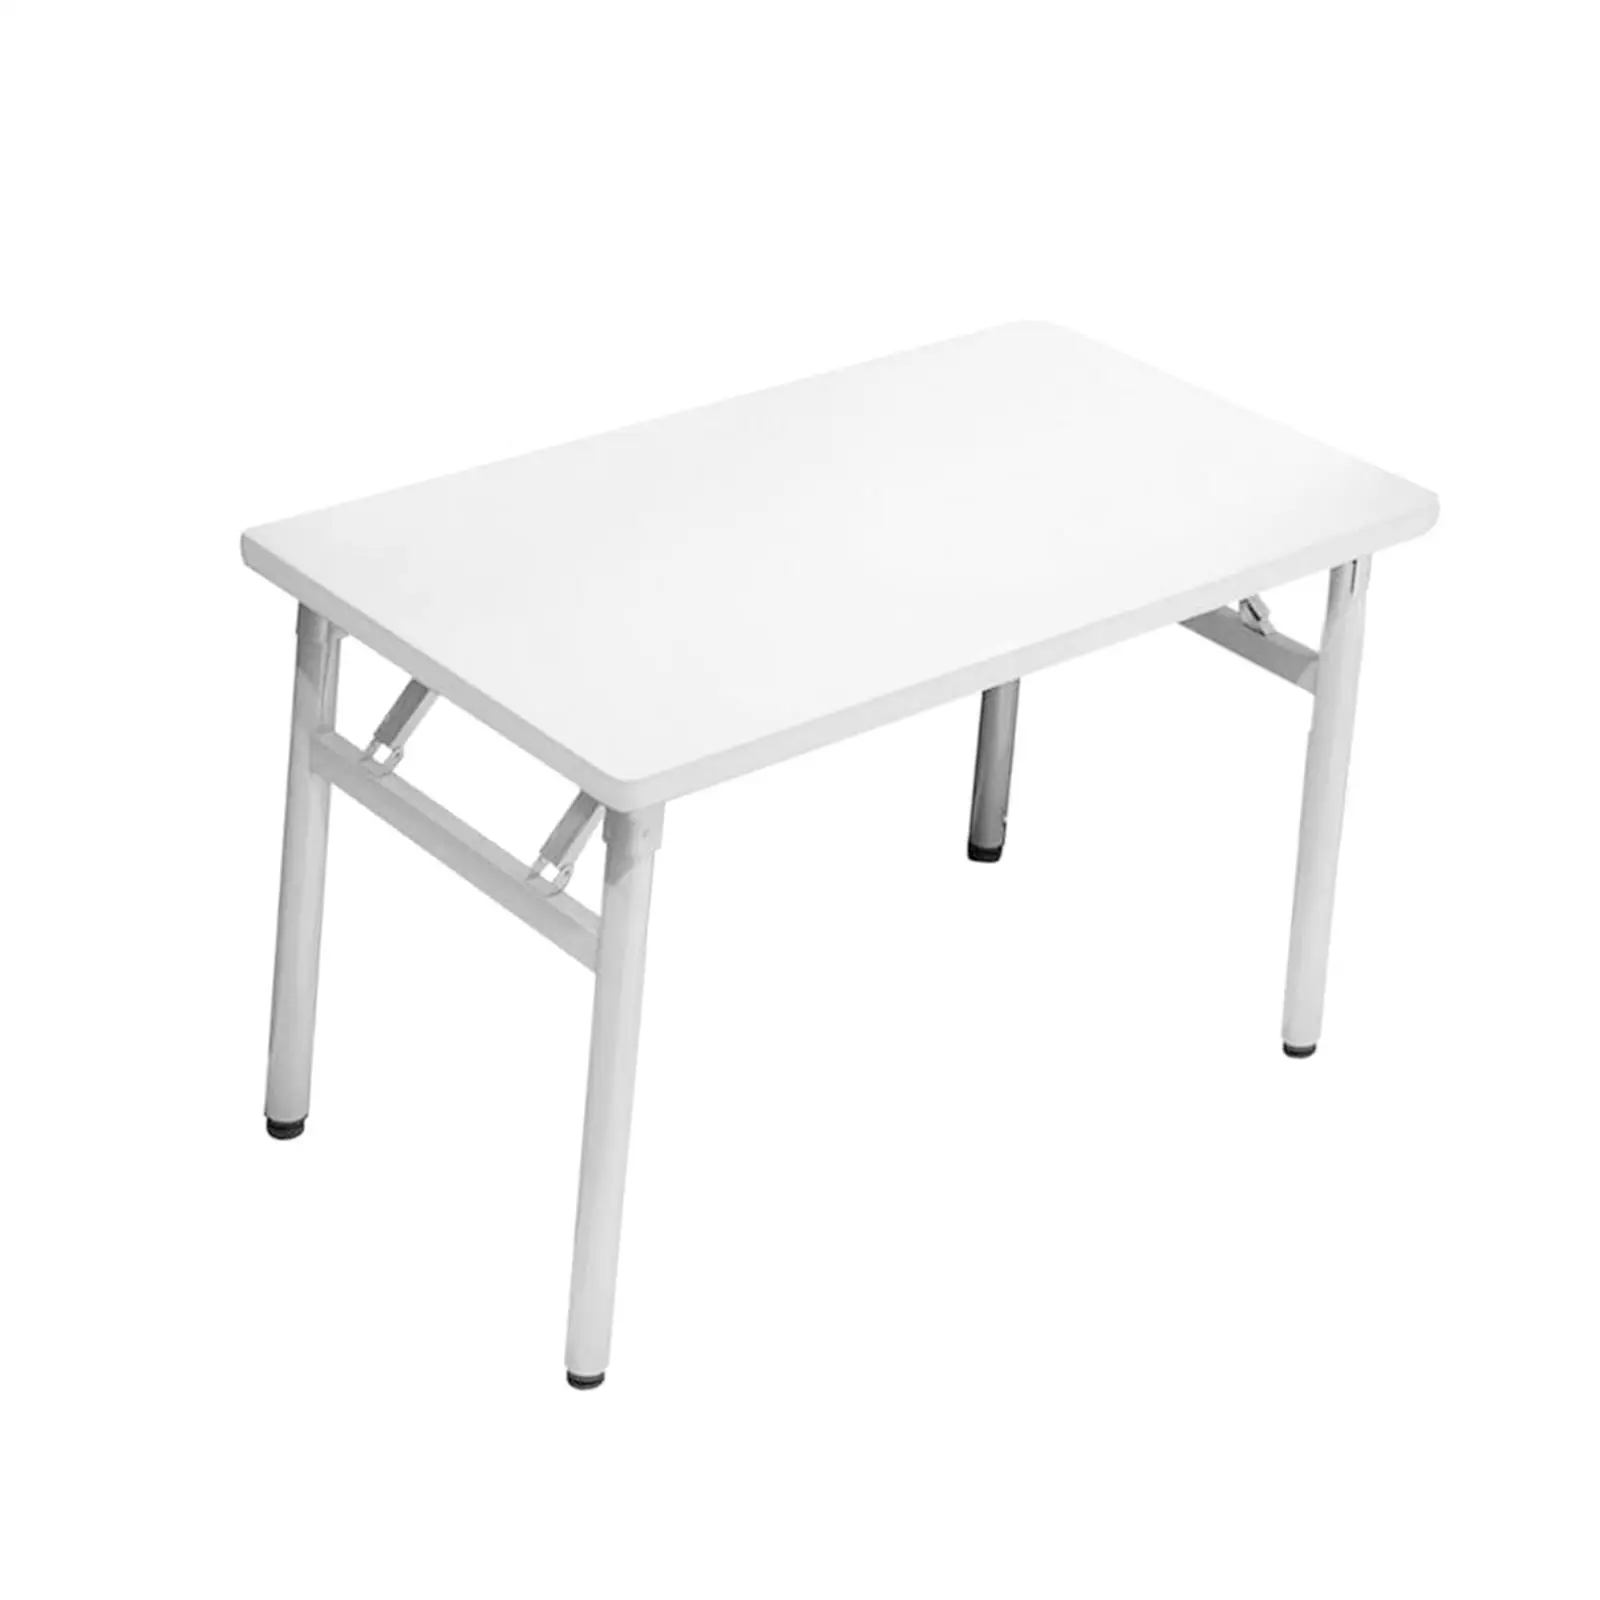 Heavy Duty Folding Table Work Station Laptop Tea Coffee Picnic Table Desk Camping Table Computer Table for Party Indoor RV BBQ